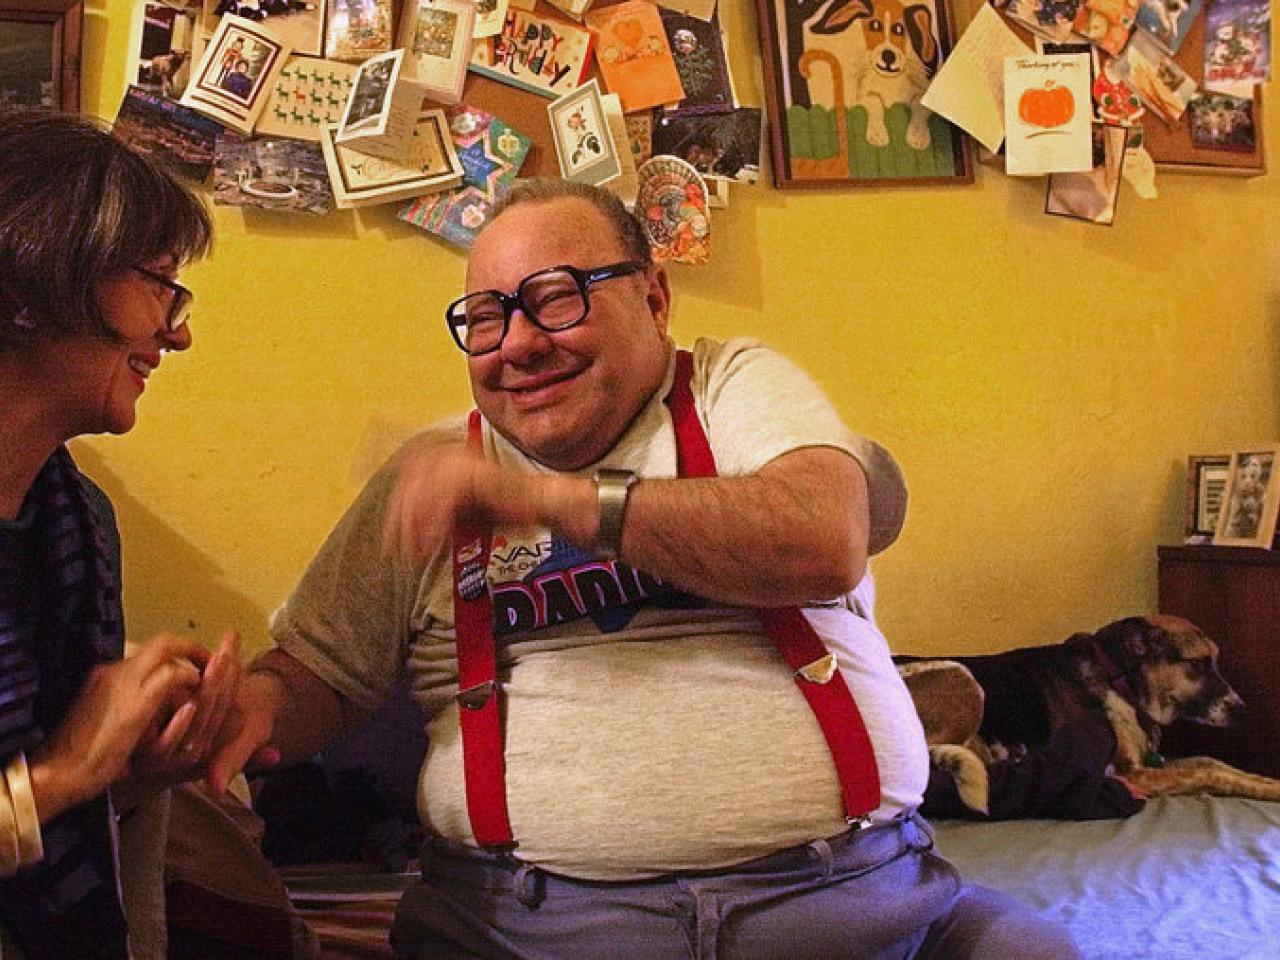 Larry Selman, a community activist and fundraiser with an intellectual disability, and filmmaker Alice Elliot sit, holding hands, talking and laughing in a bedroom. Behind them is a dog, a poster board filled with cards, a dresser with an old TV on top and framed photos.